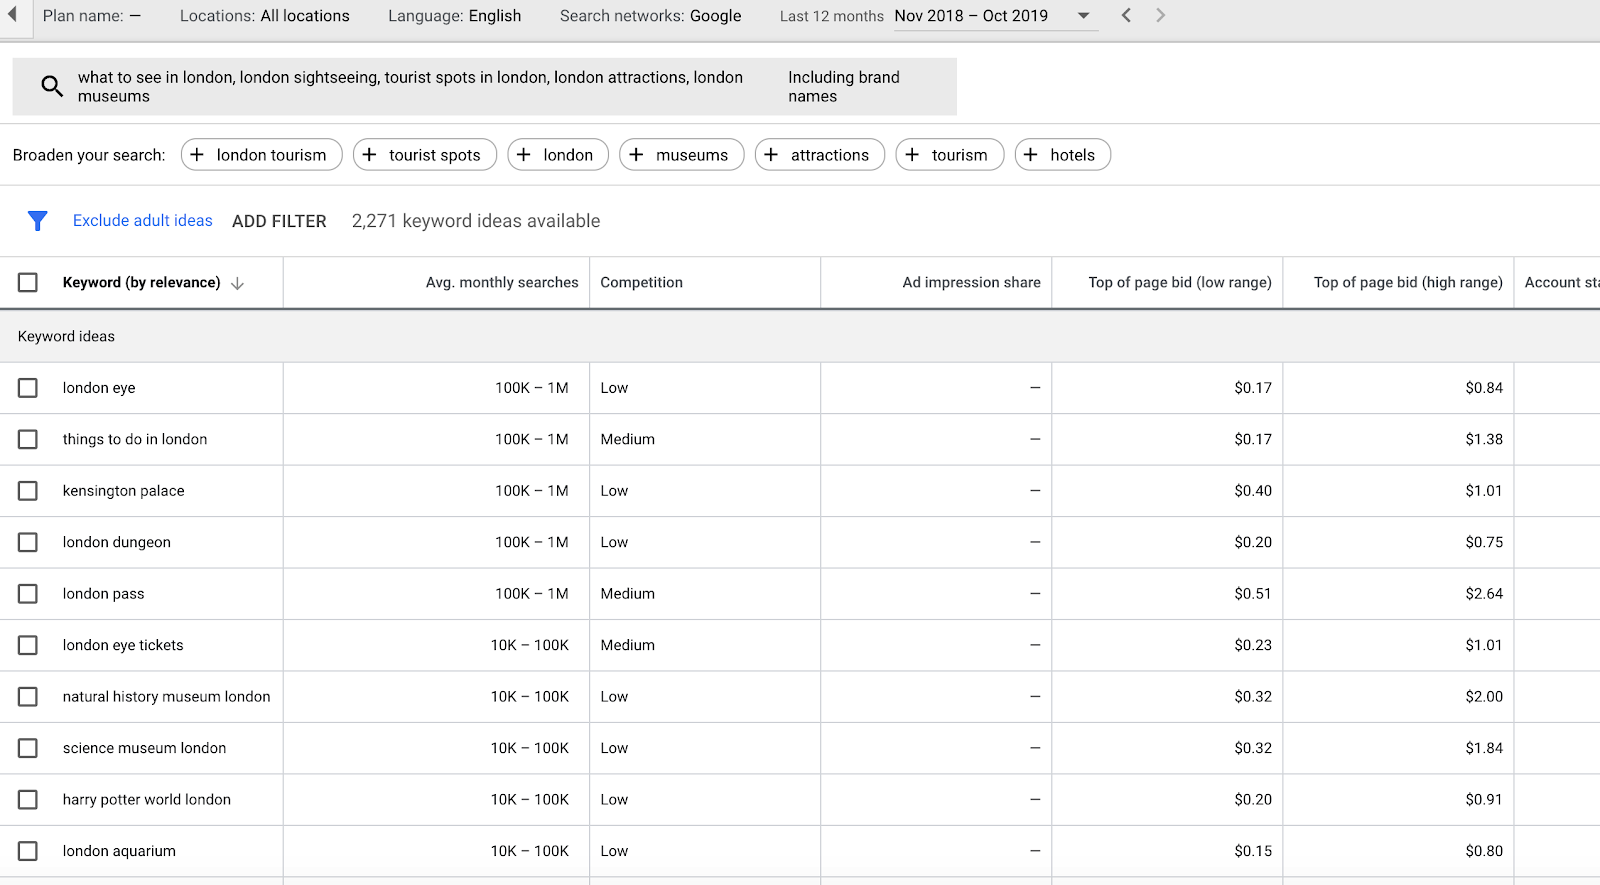 A screenshot example of Google Keyword Planner results